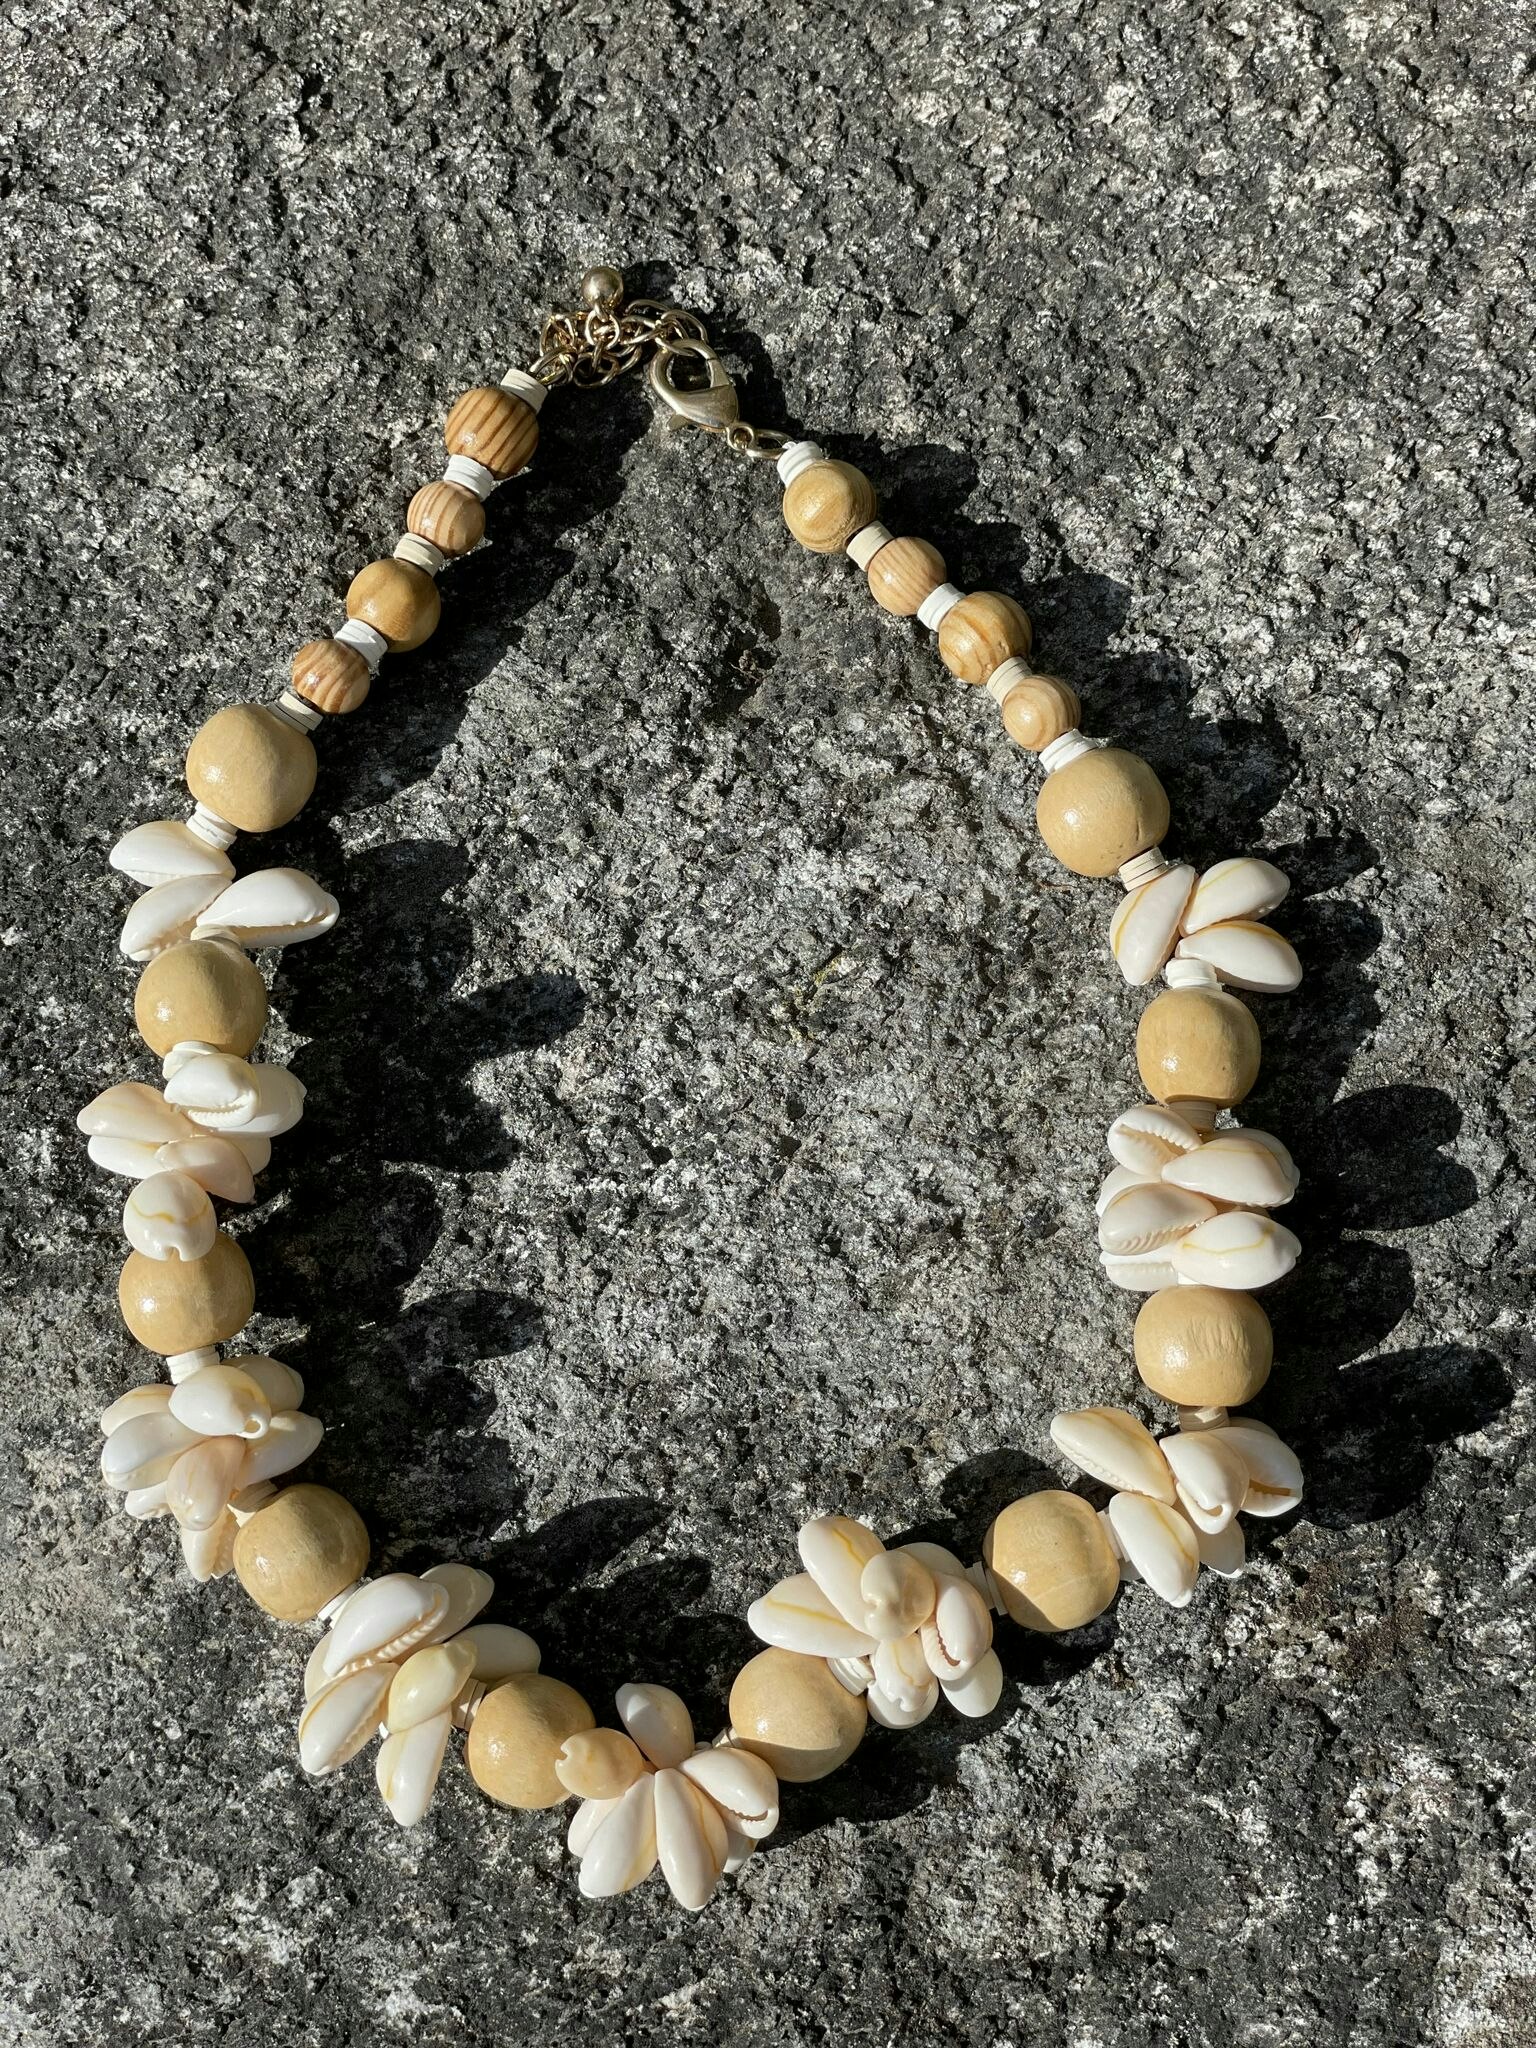 Necklace with wooden beads and shells